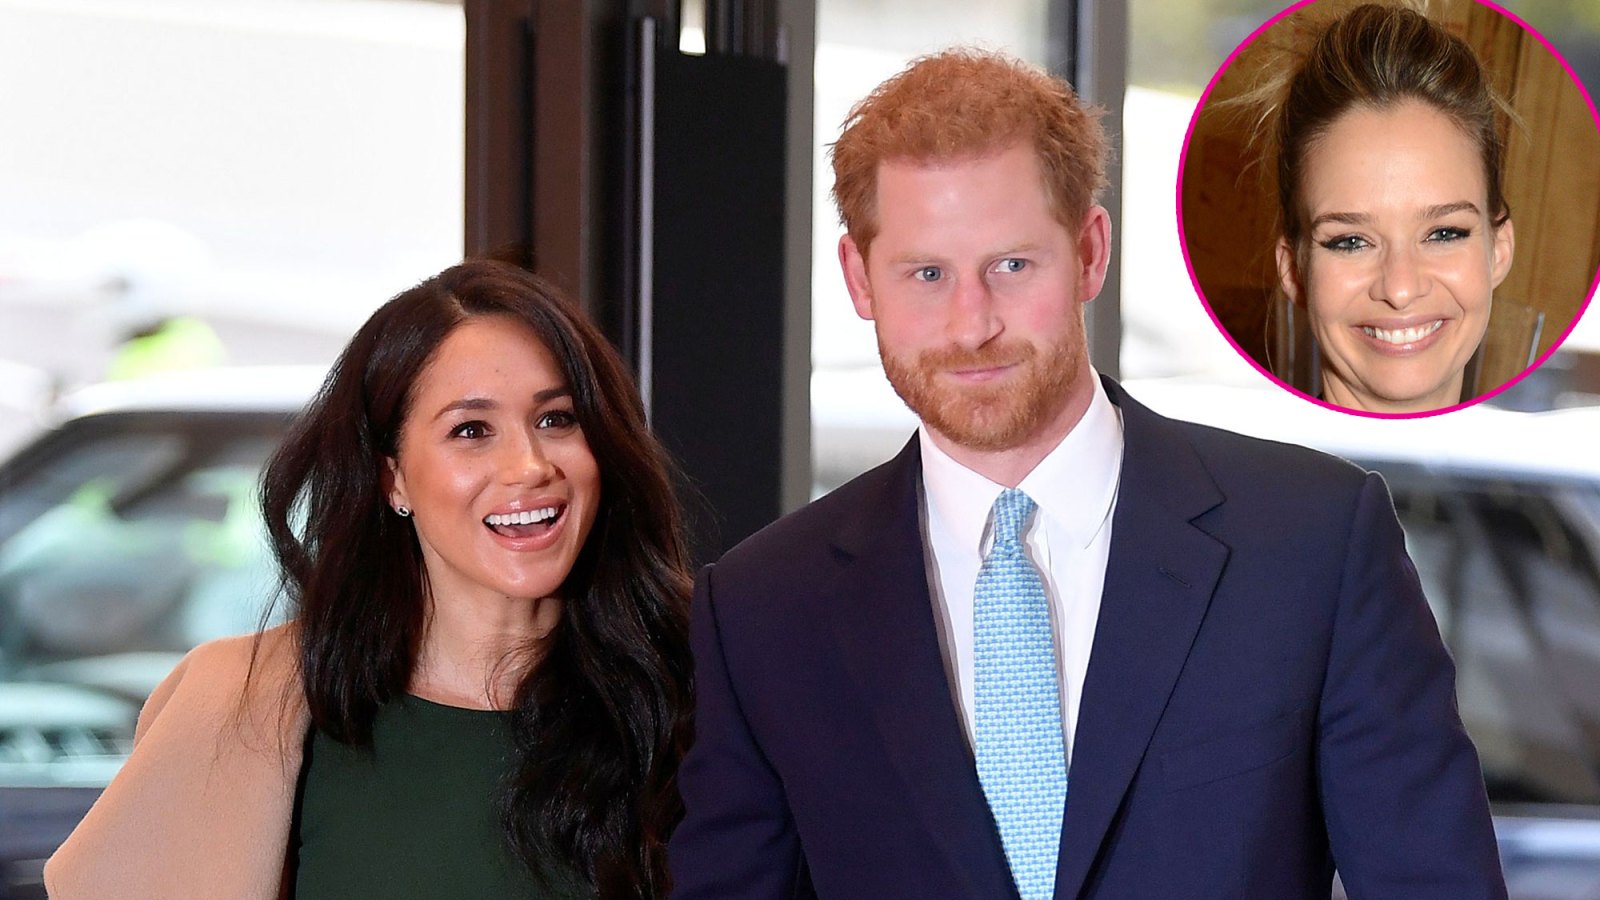 What Meghan Markle and Prince Harry Biggest Adjustments Will Be After LA Move According to Marissa Hermer